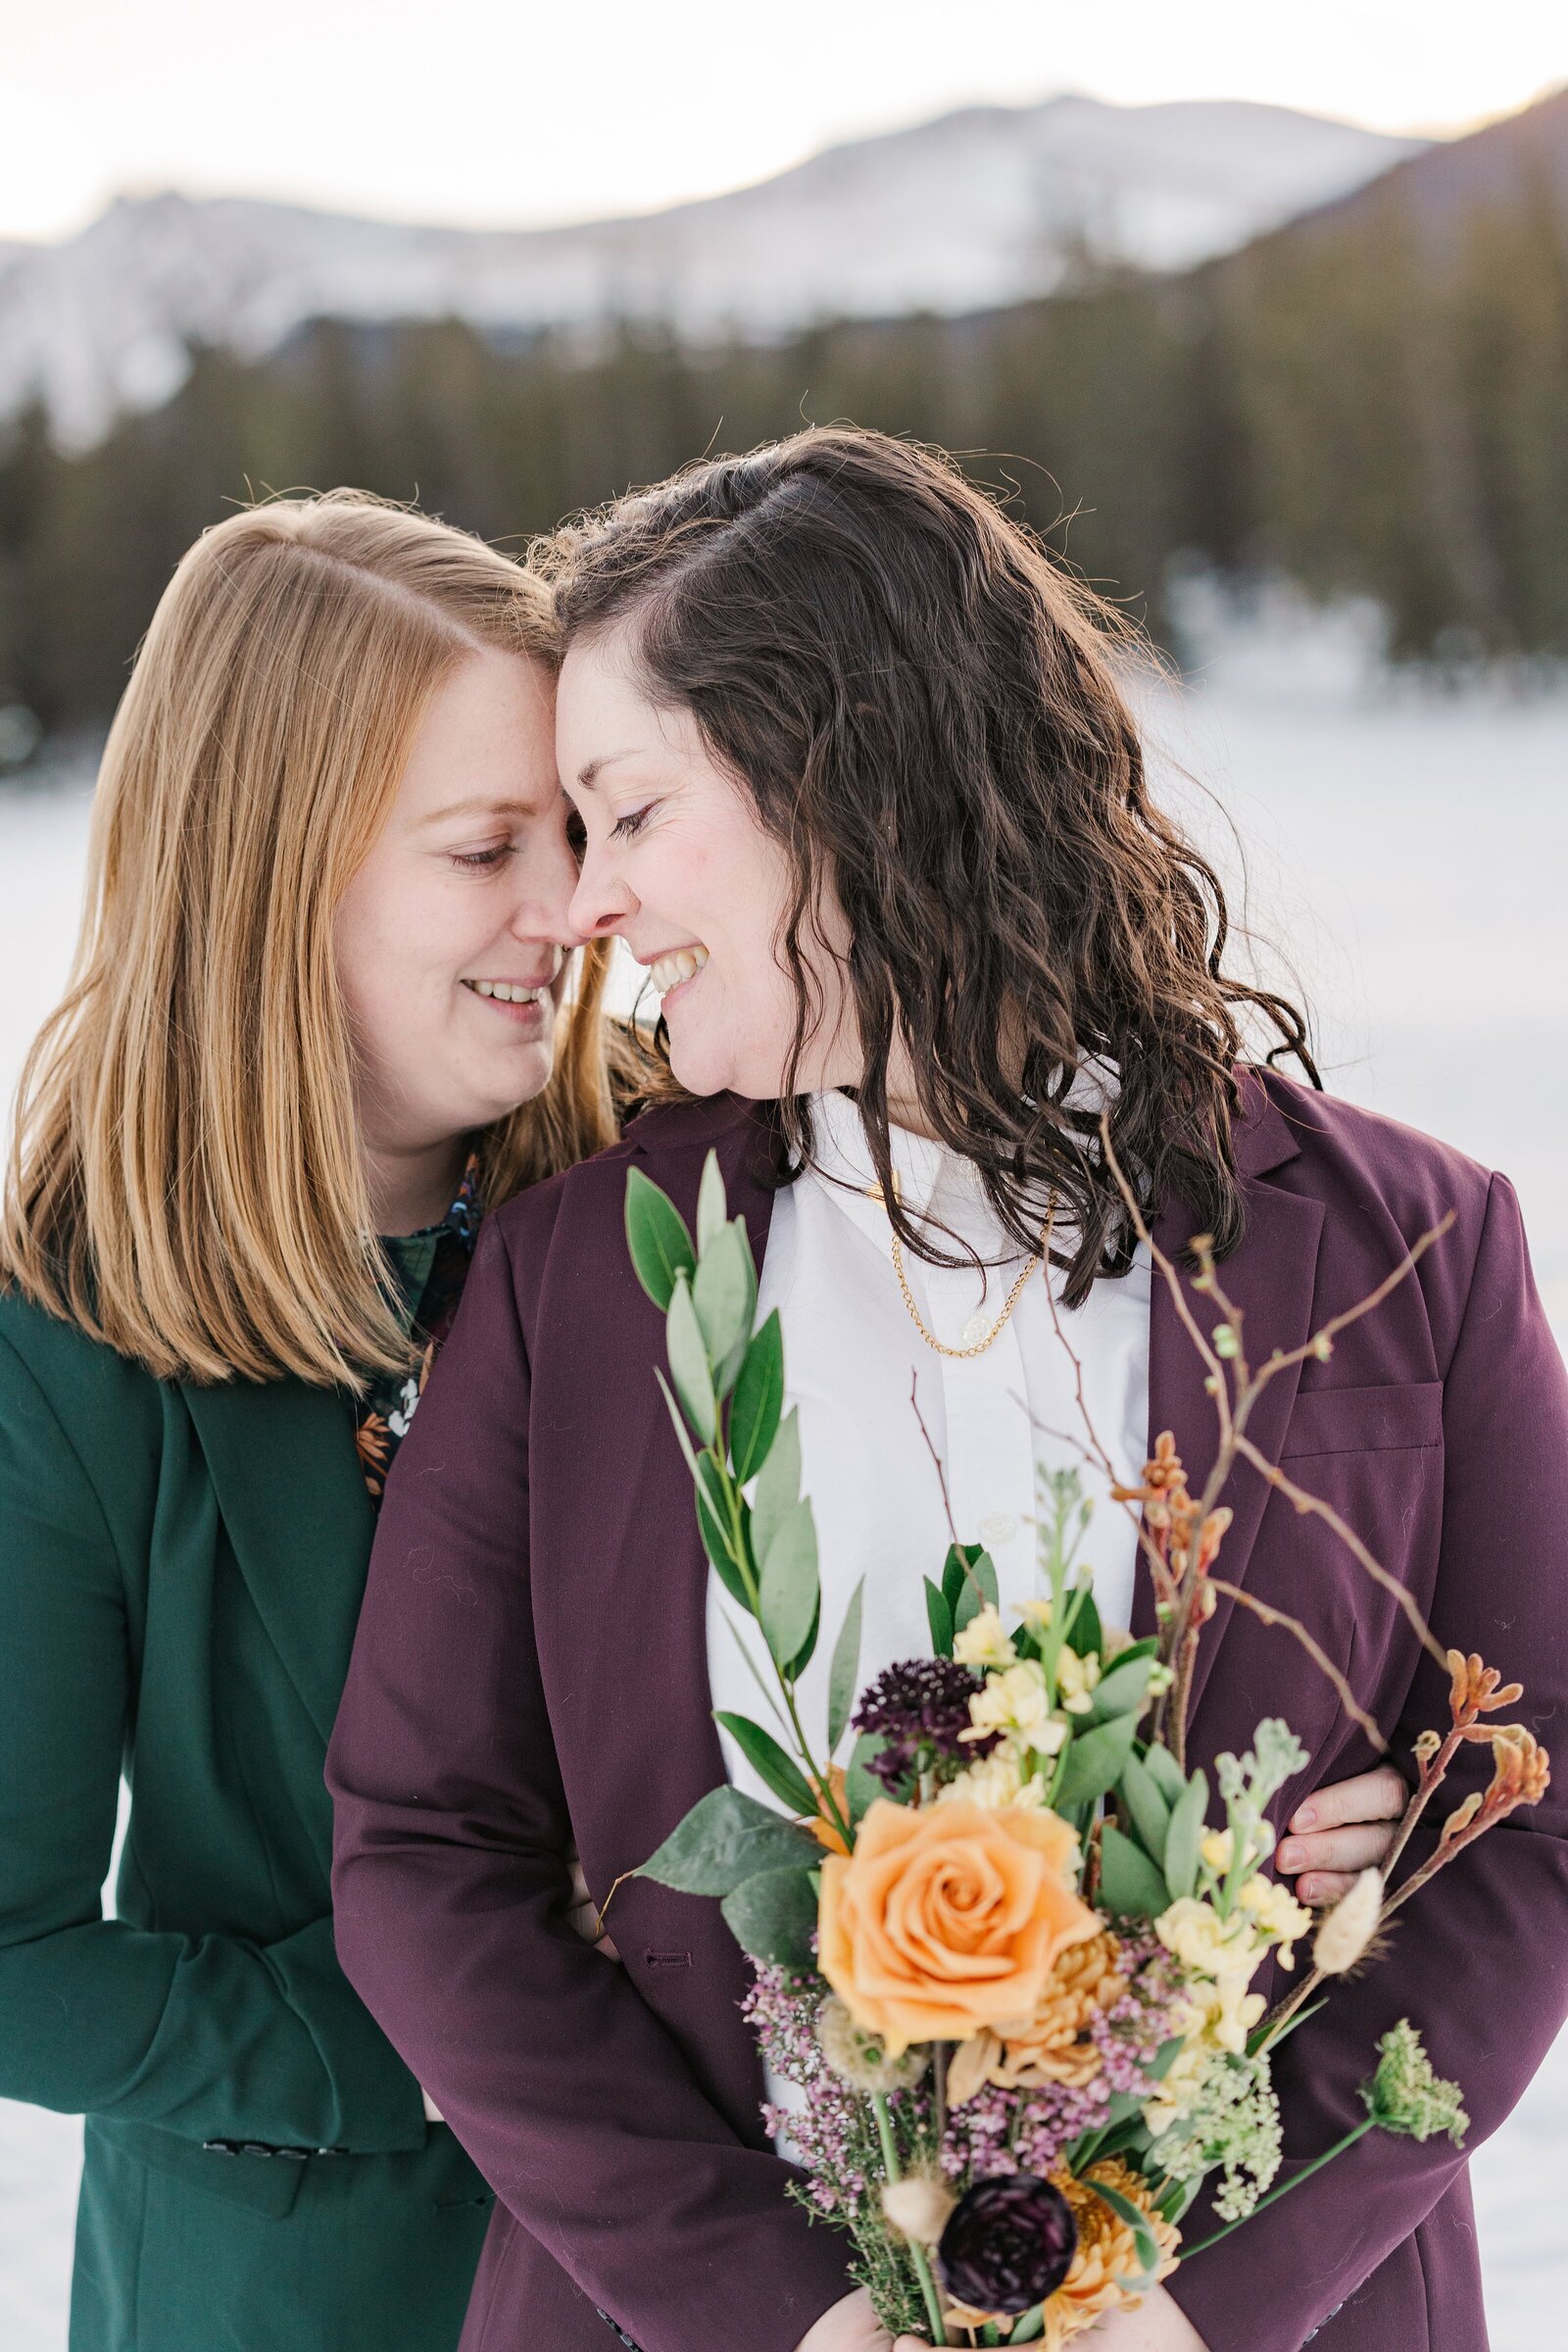 Celebrate your love amidst the scenic beauty of the Colorado mountains with Samantha Immer Photography. Our customized and personalized approach will make your special day unforgettable.